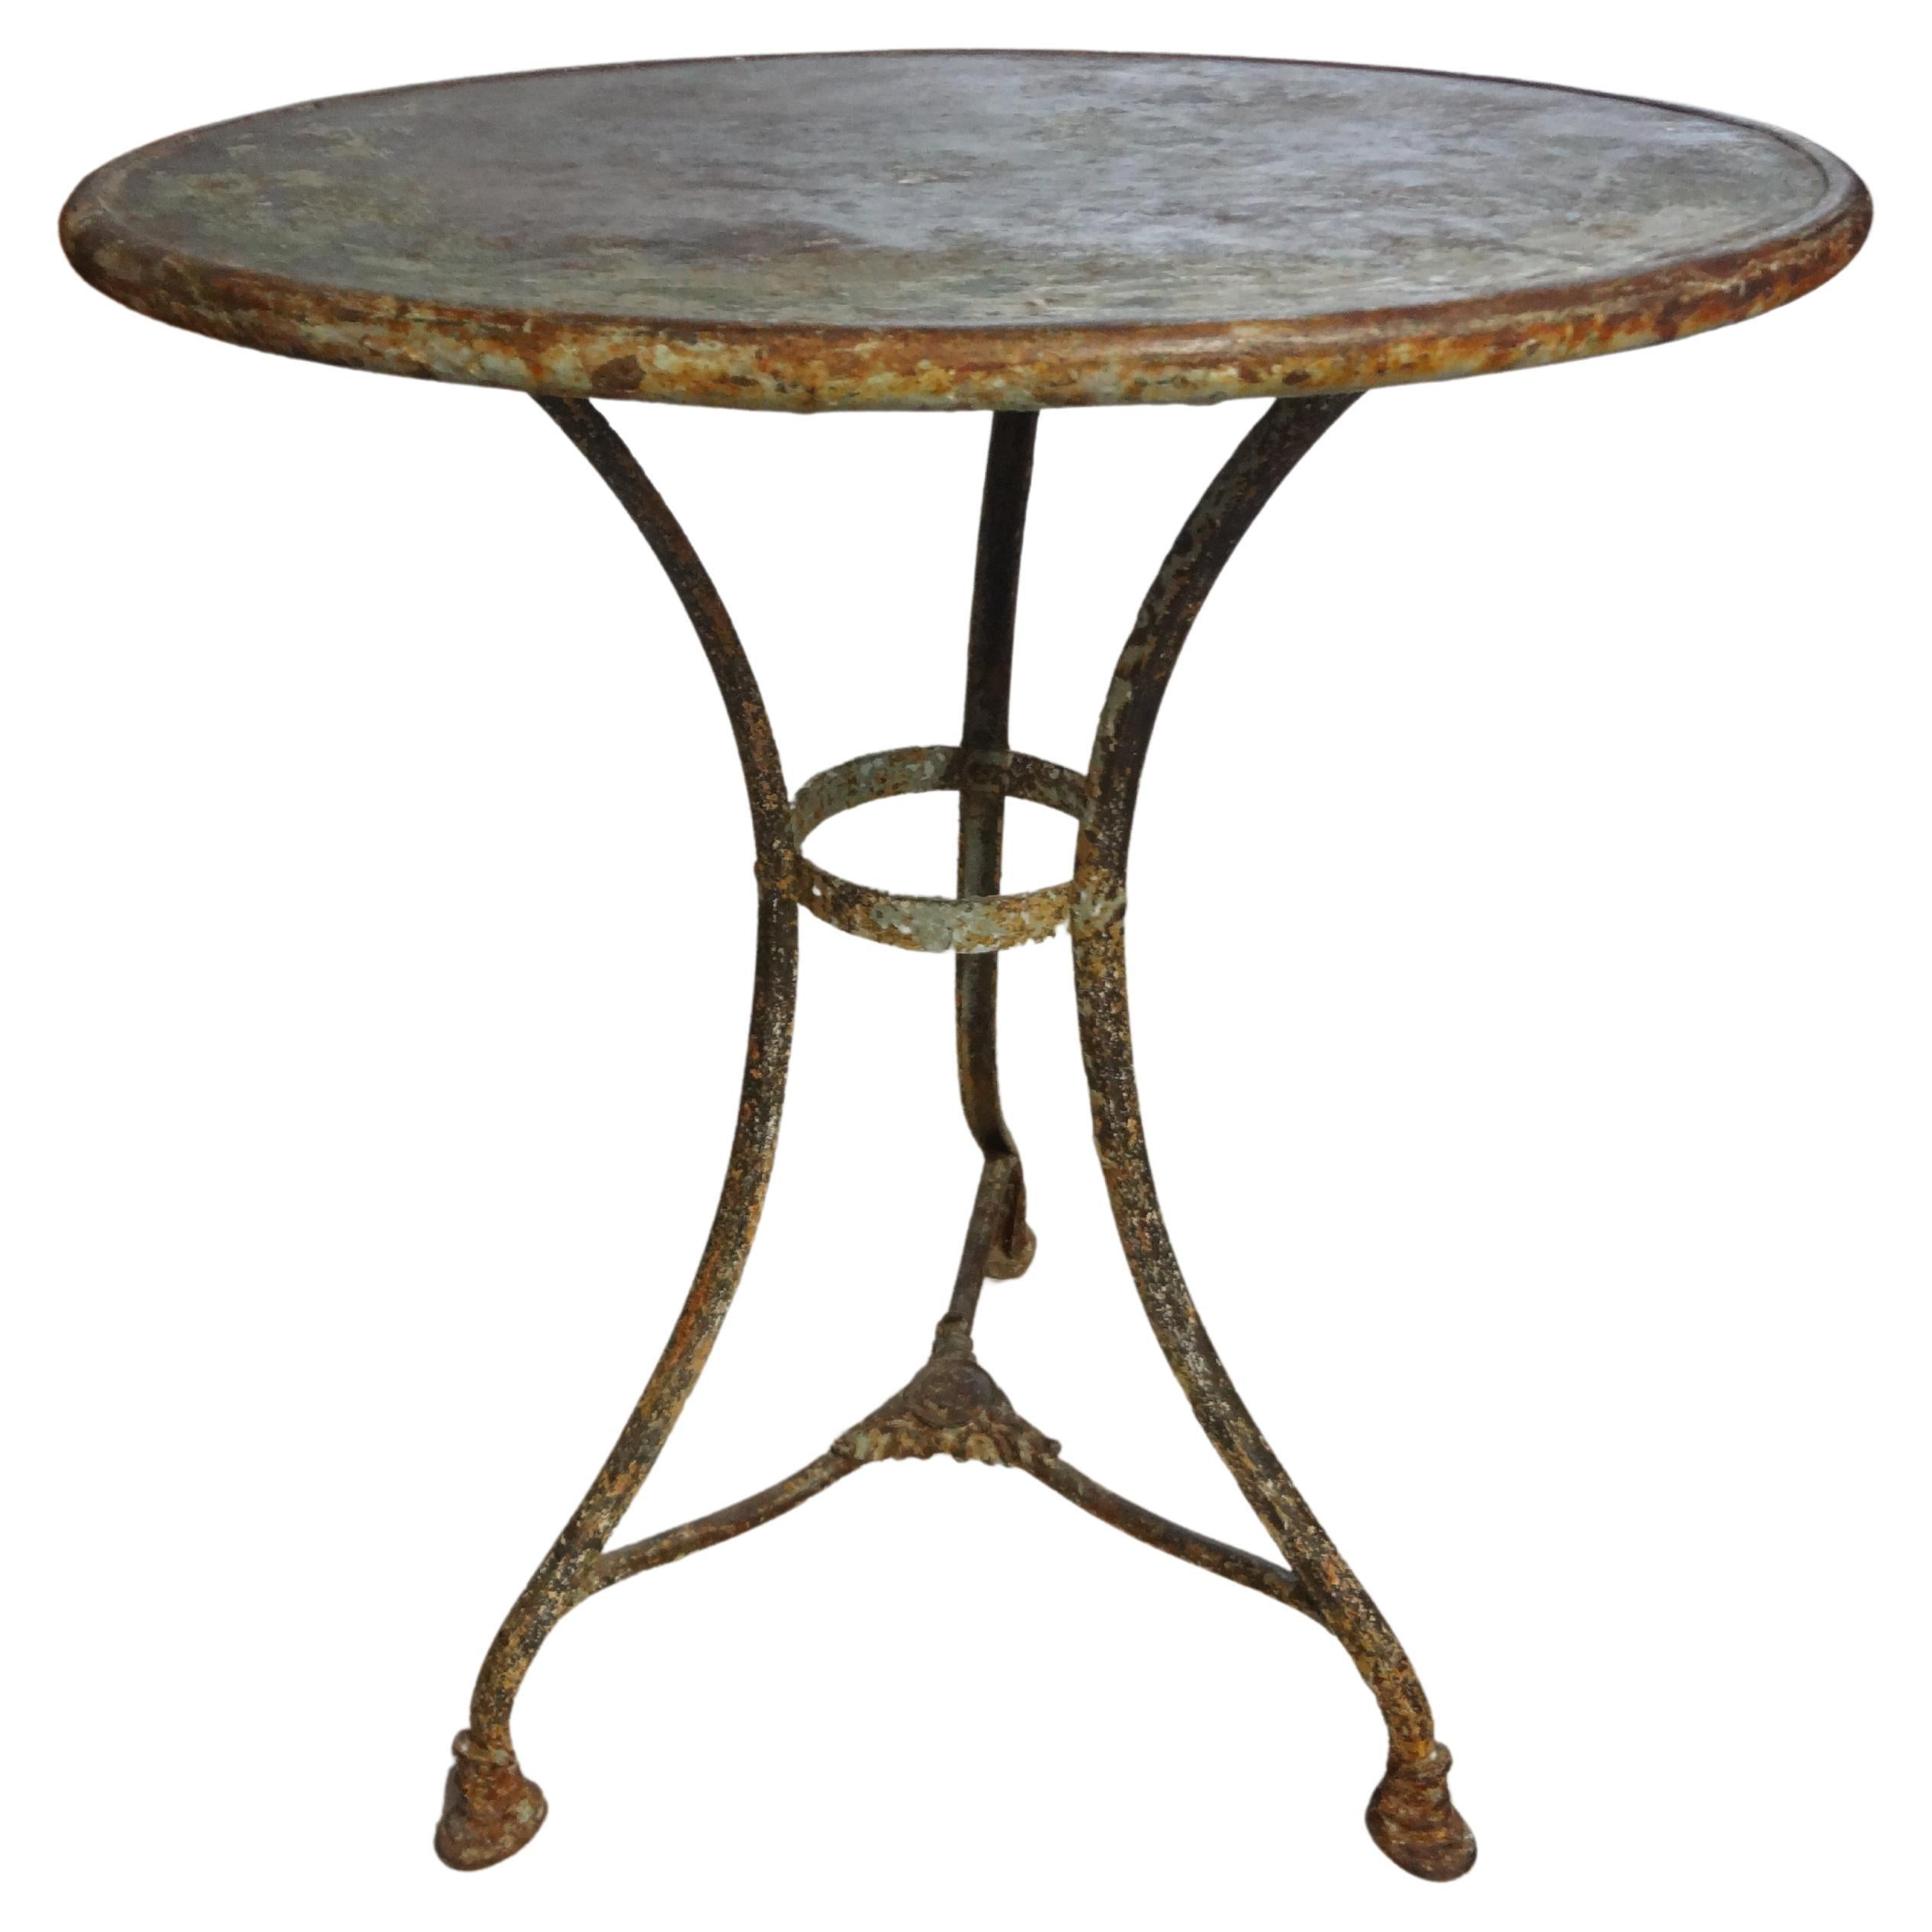 19th Century French Garden Table By Arras Foundry